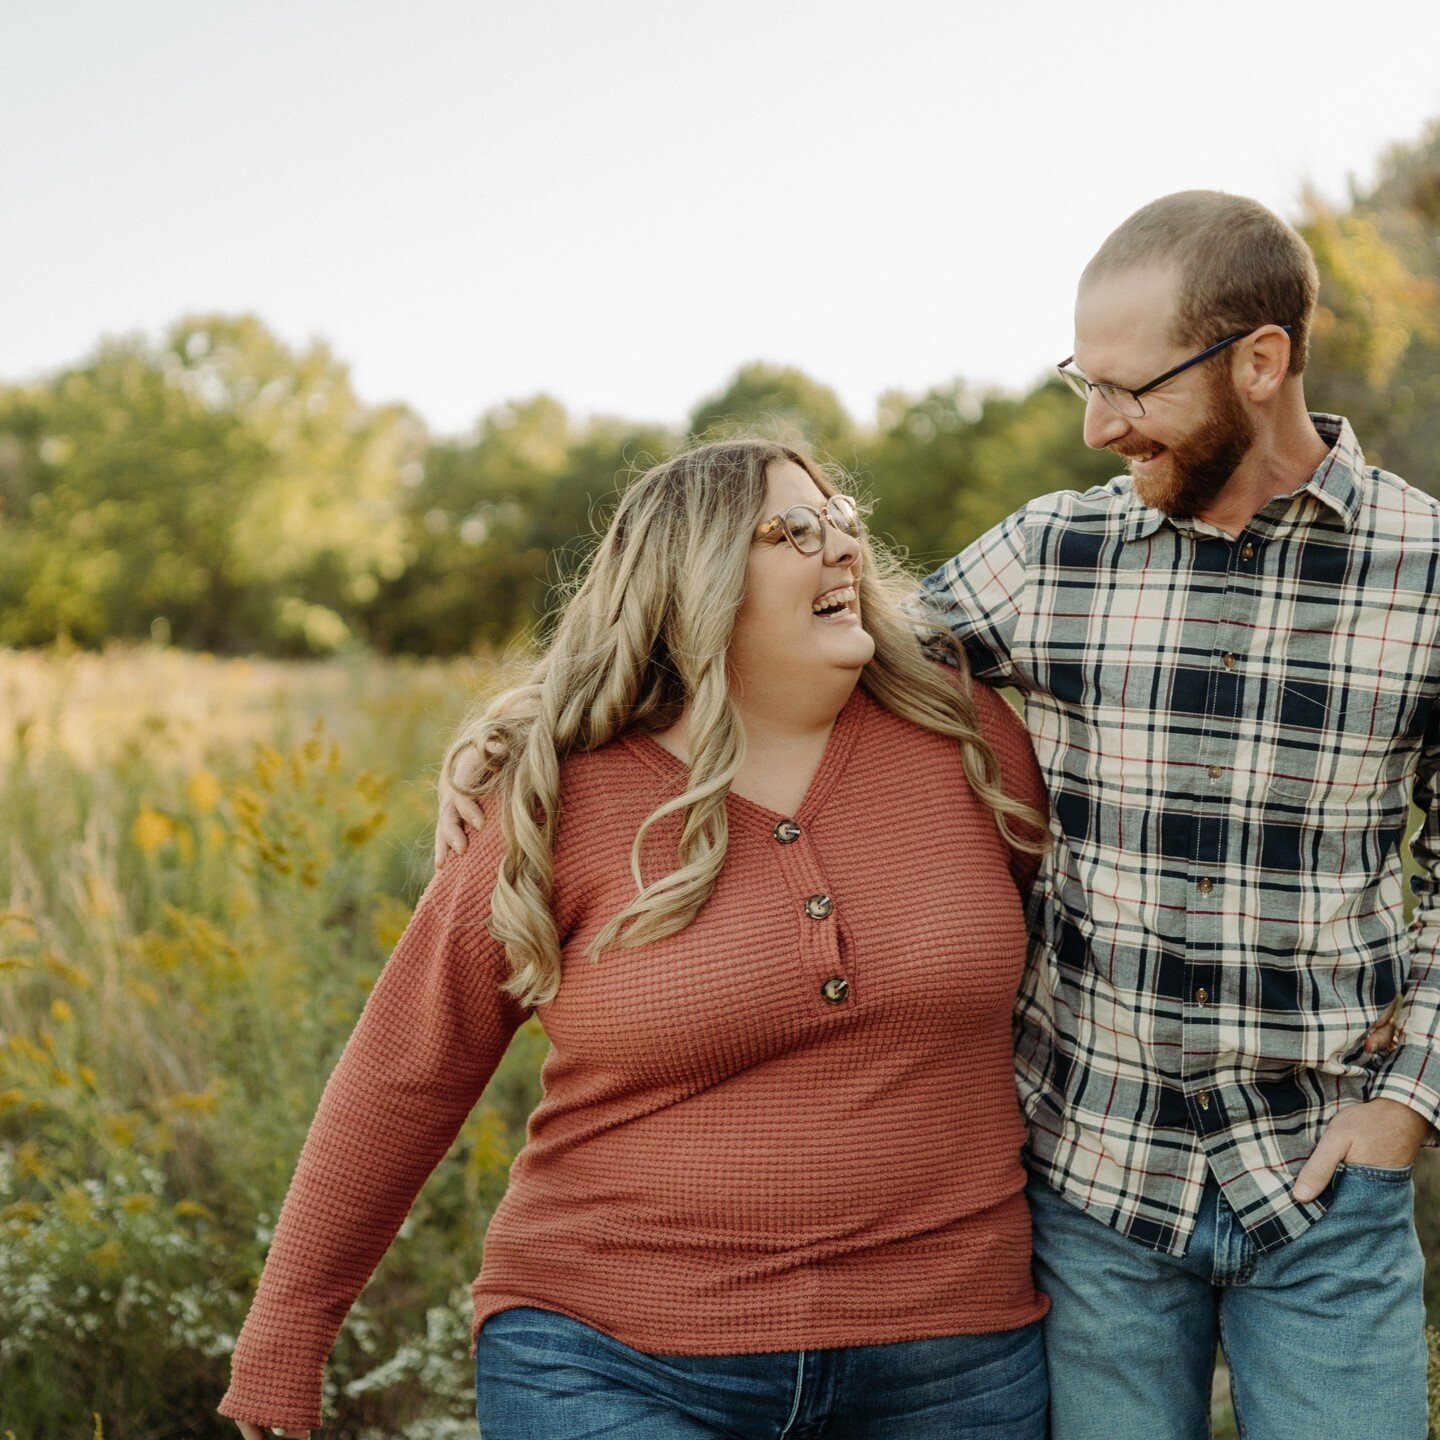 Today is wedding Day for Kenneth Rotz and Melissa Howe. Here is their story as told by Melissa and you are going to love this--get ready for a chuckle.

&quot;We met online. After two weeks of chatting, we had our first date. Our first date was a dou